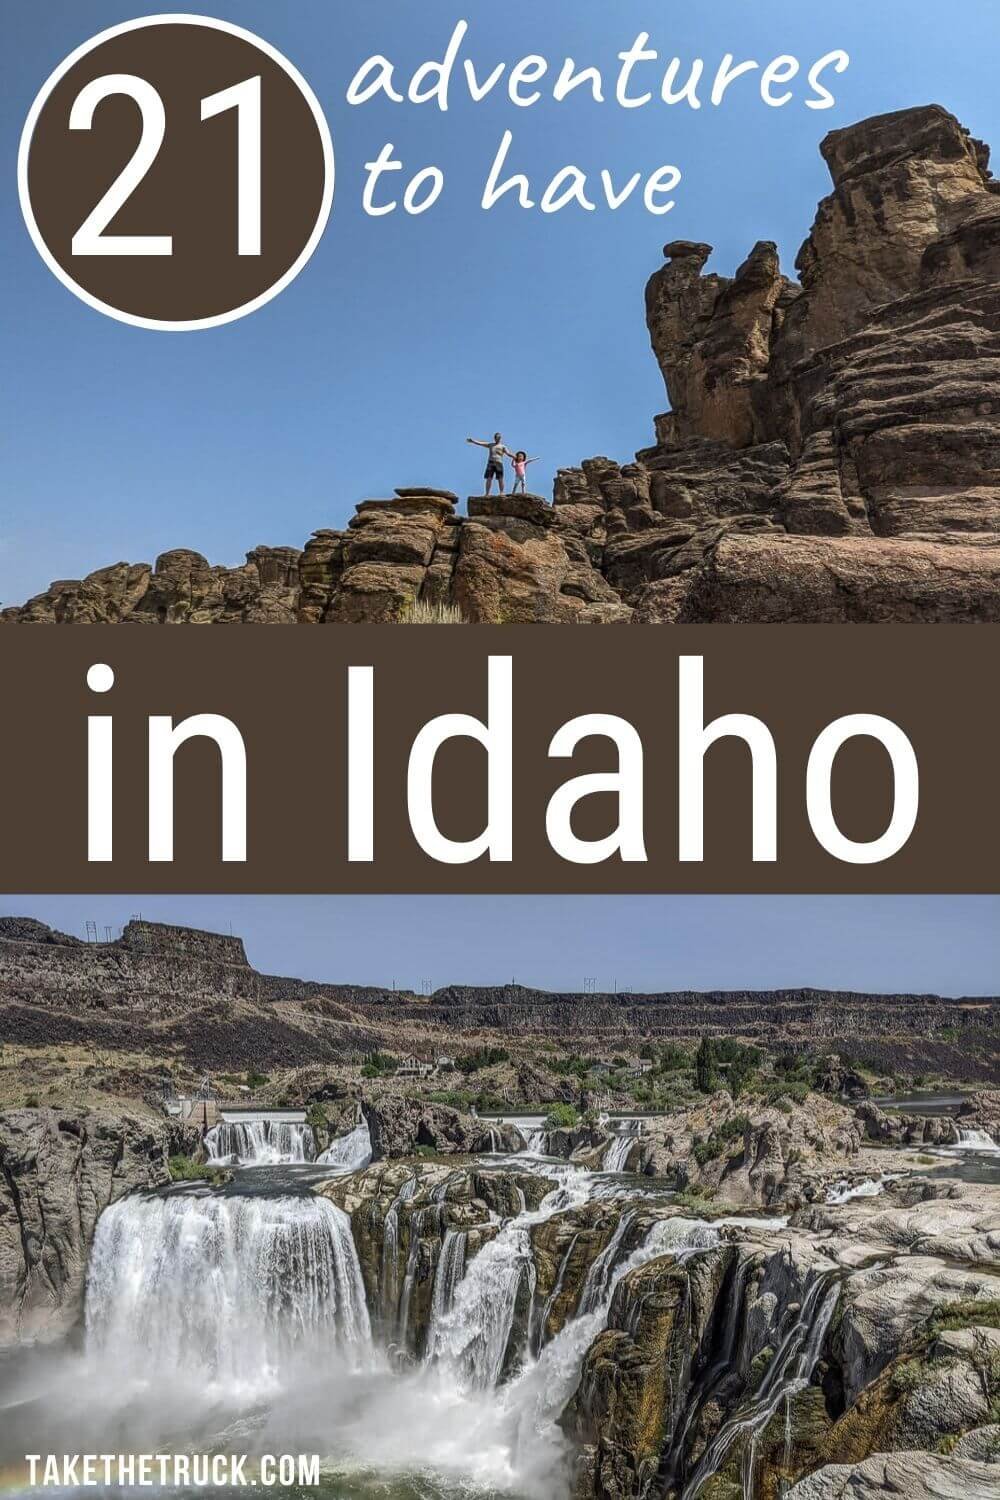 Planning some Idaho travel or an Idaho road trip? This post can help you find the top things to see in Idaho and the best things to do in Idaho - both northern Idaho and southern Idaho.